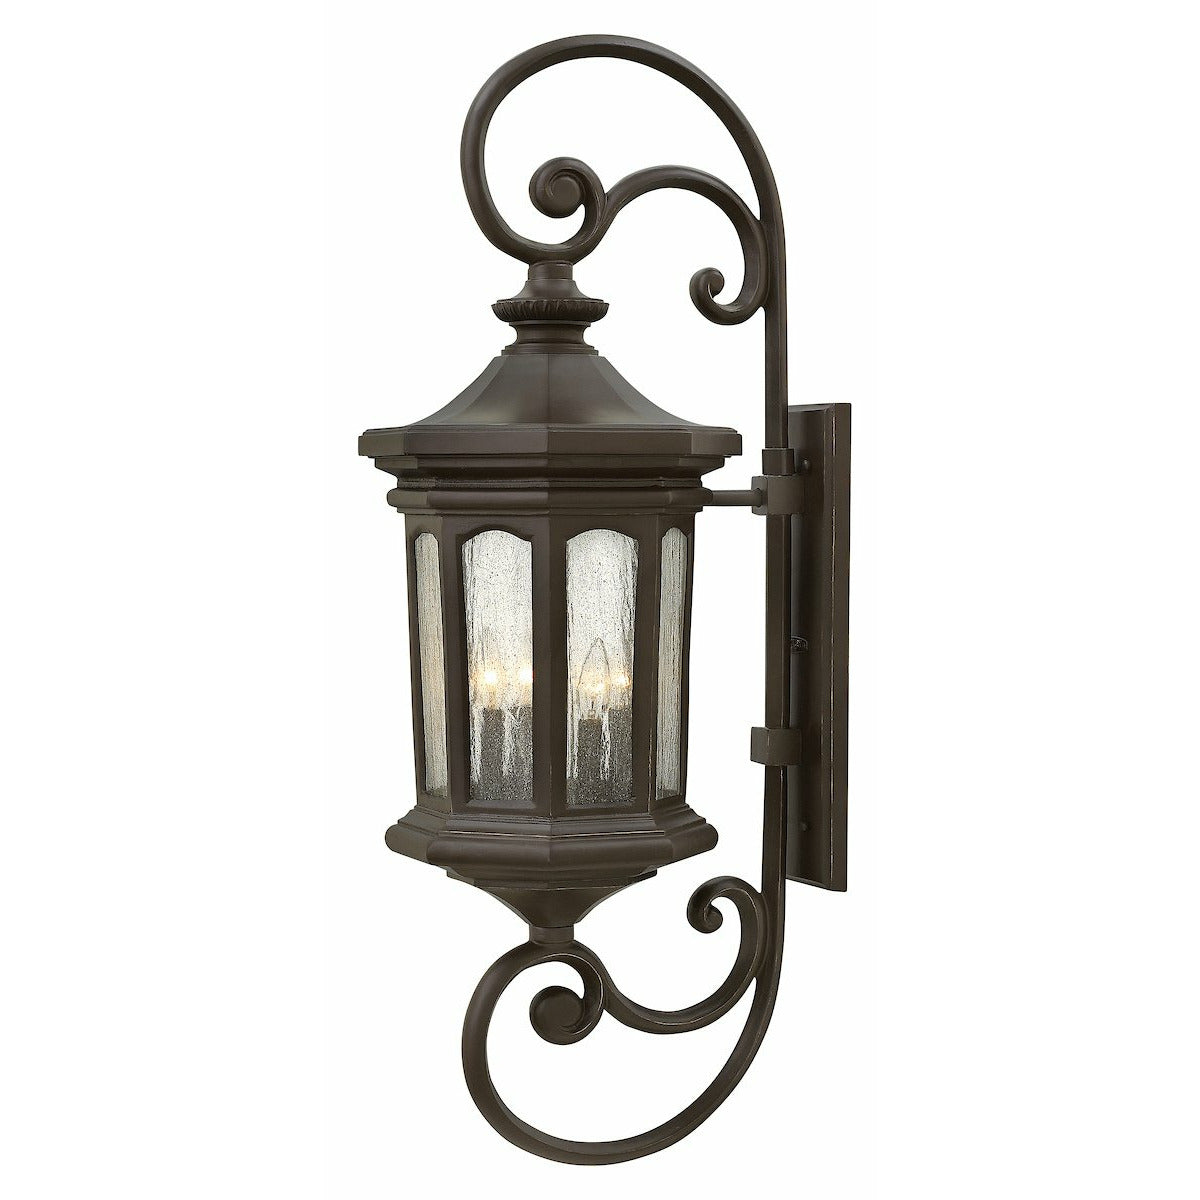 Raley Outdoor Wall Light Oil Rubbed Bronze-LL